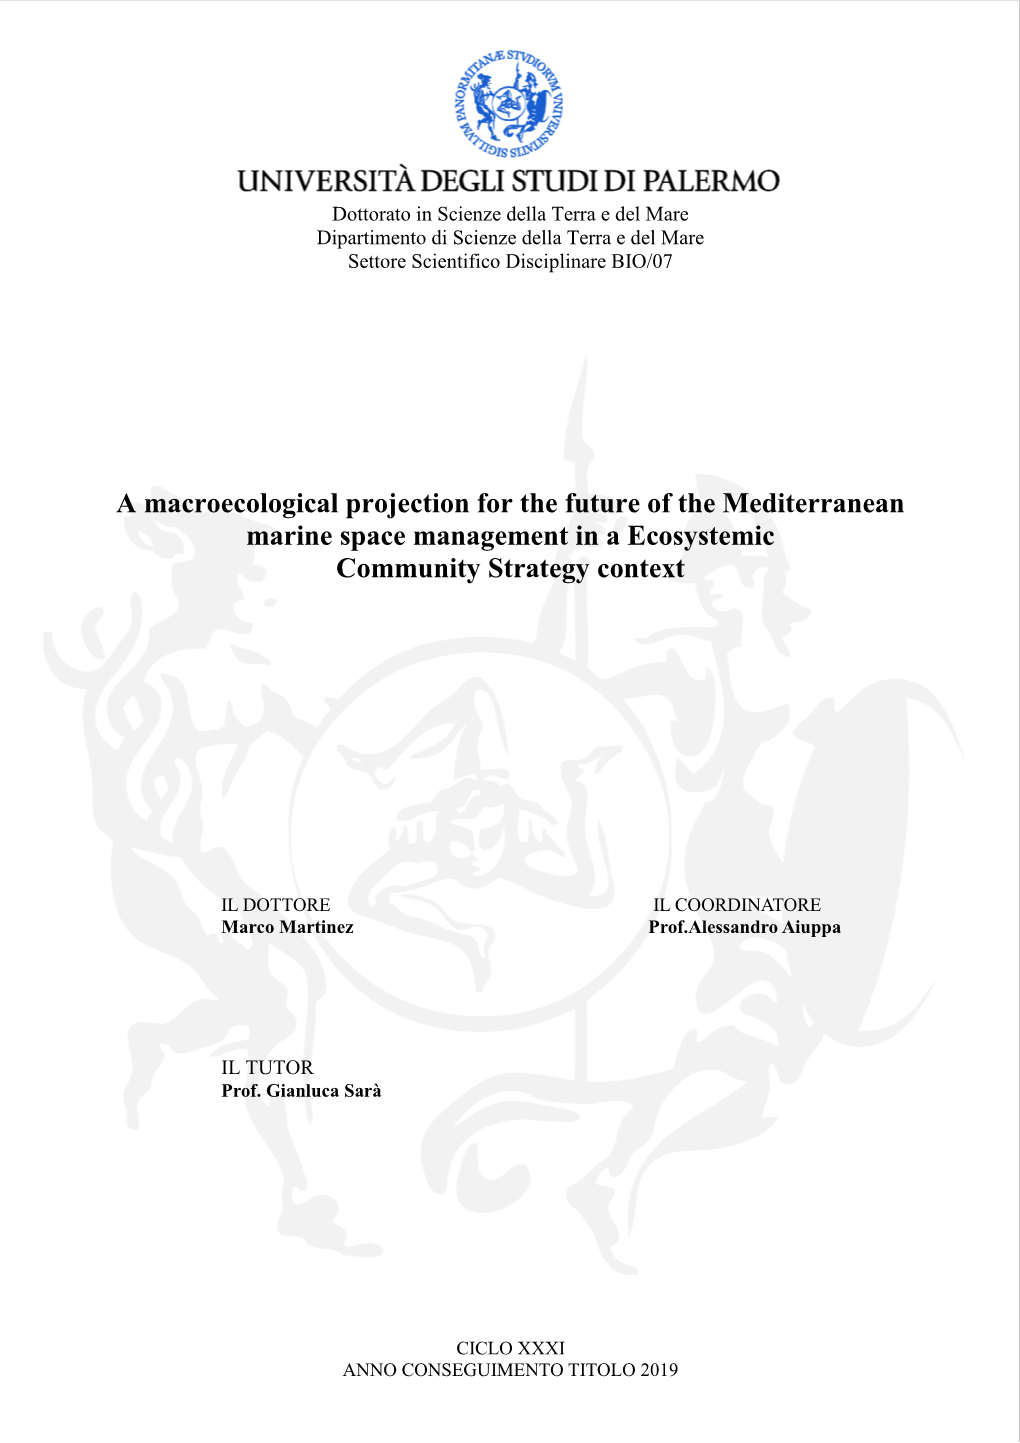 A Macroecological Projection for the Future of the Mediterranean Marine Space Management in a Ecosystemic Community Strategy Context